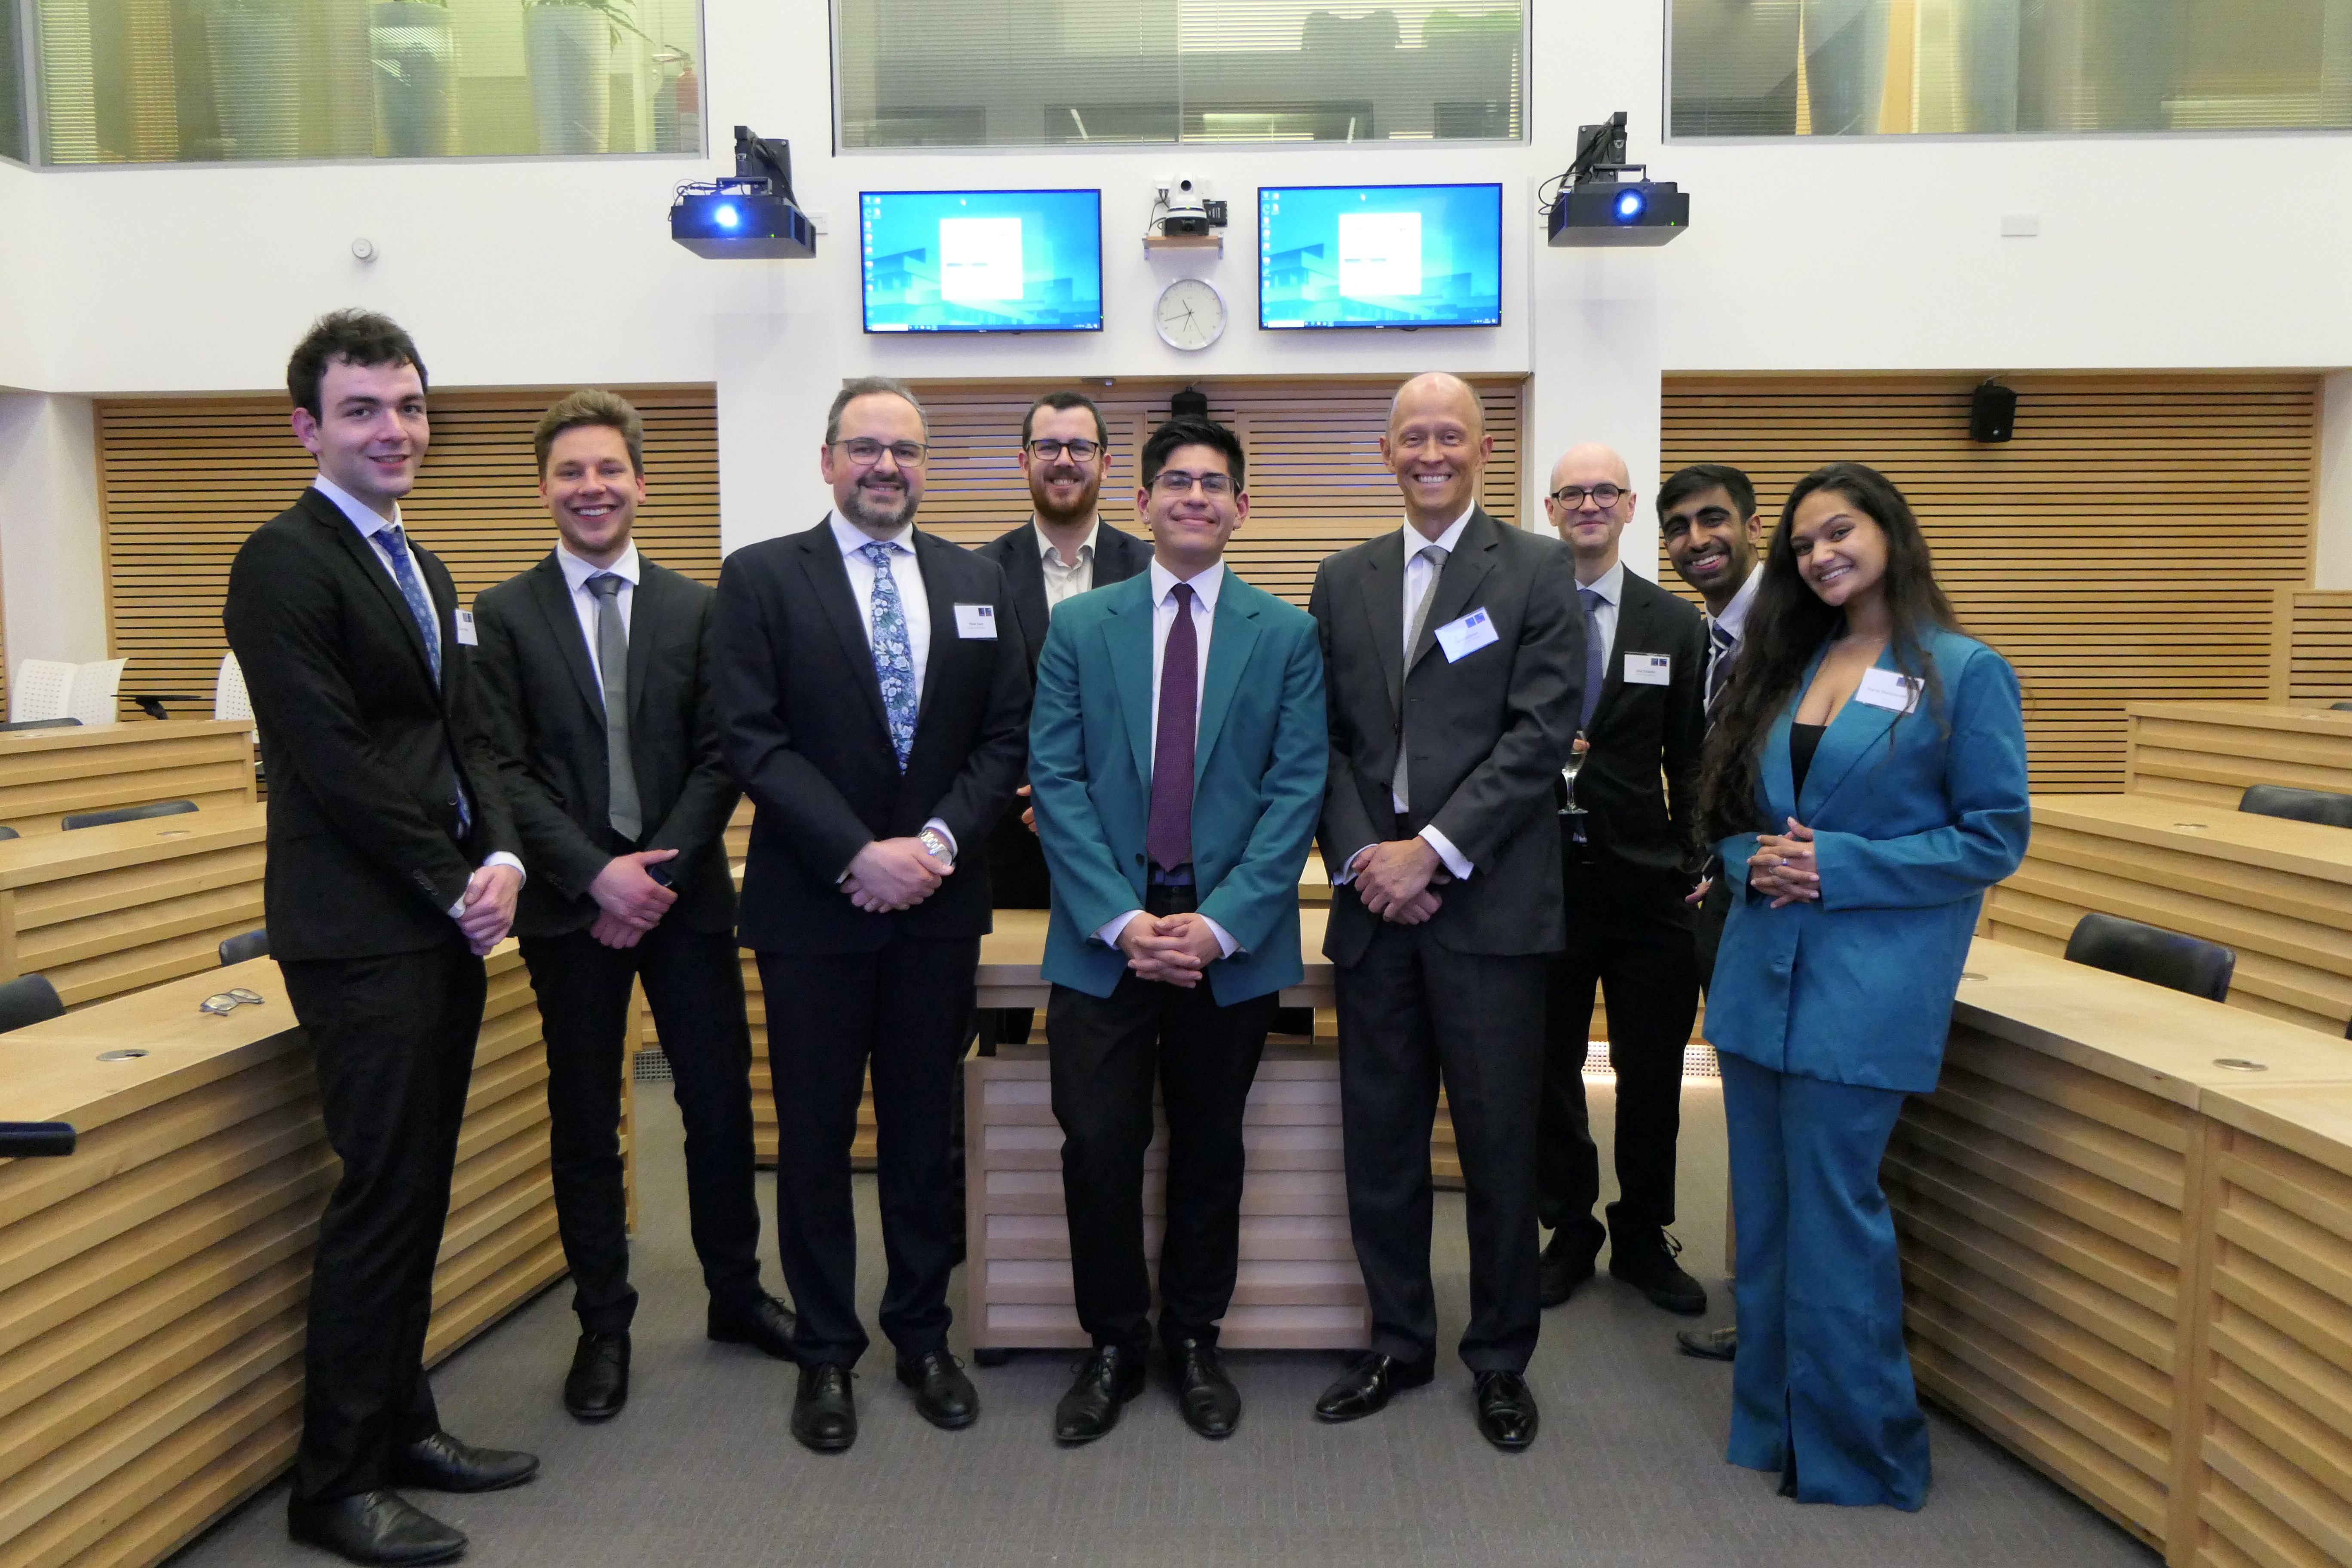 Joe Middleton and Oliver Lewis with the winning team (Luca Montag and David Zuther, left), the runners up (Shanaz Sharonsenthil and Kuberan Kumaresan, right), fellow judges Lewis Graham and Max Shaefer, and Richard Wagenlaender (organiser, centre).